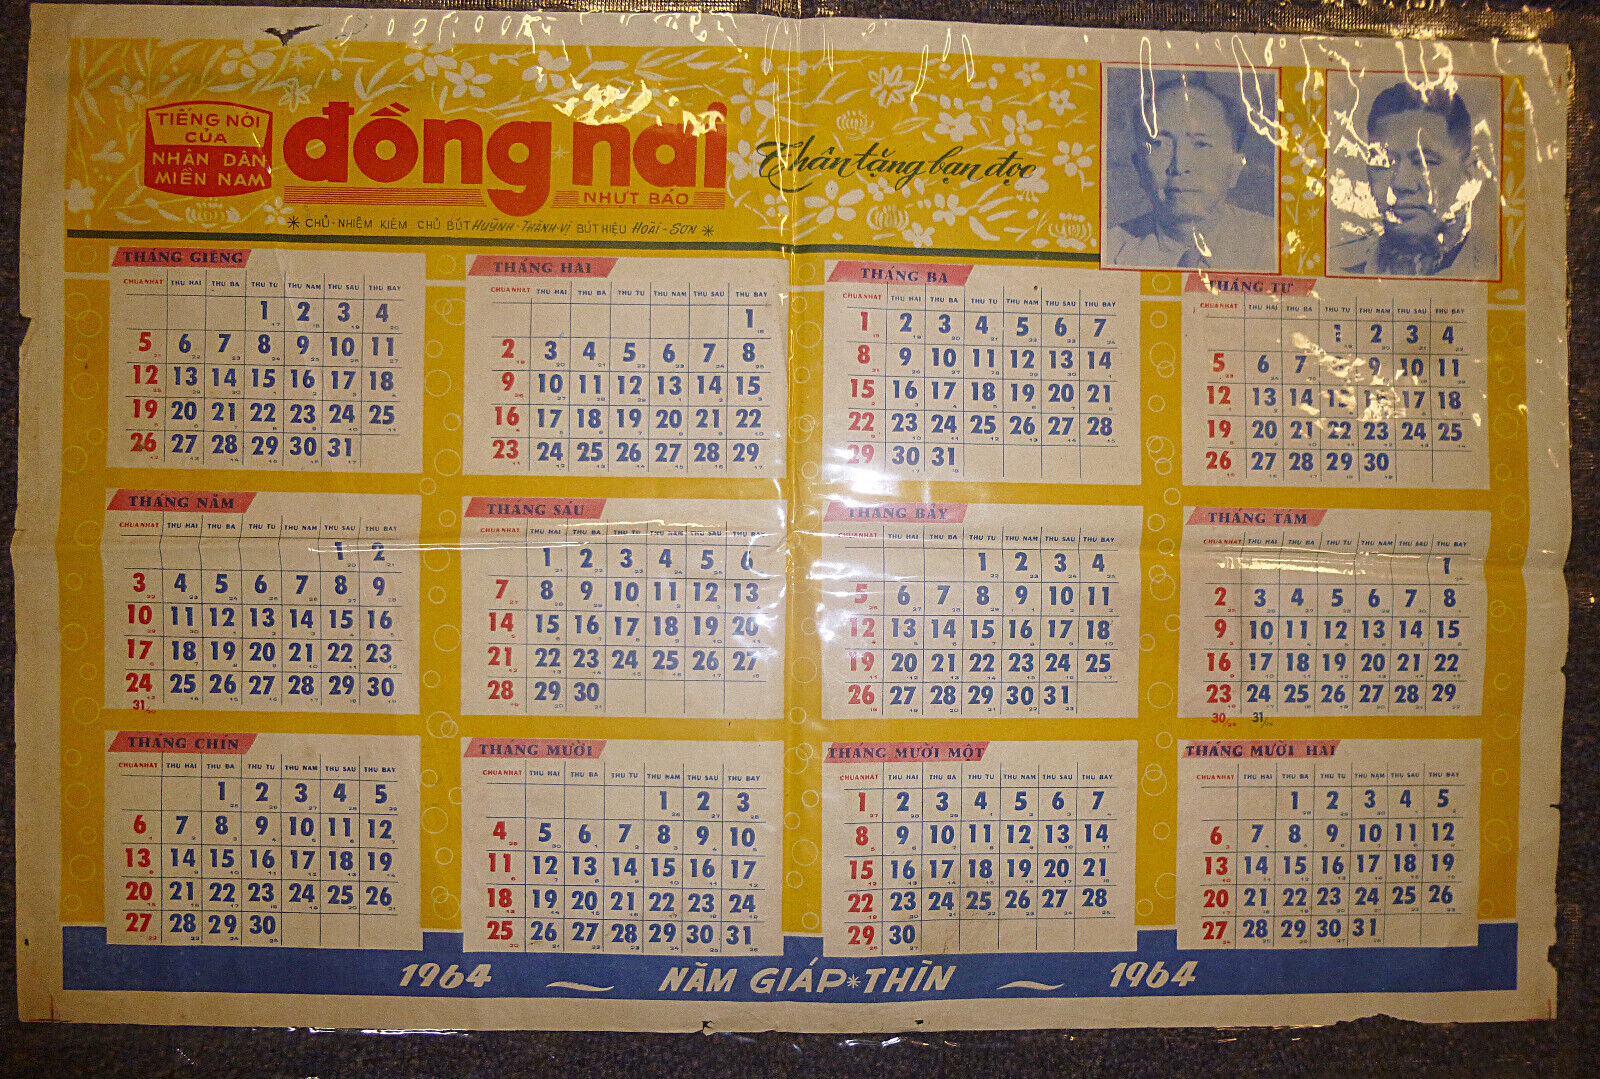 Rare 1964 Wall Calendar - YEAR of the DRAGON - Voice of the South - Vietnam War